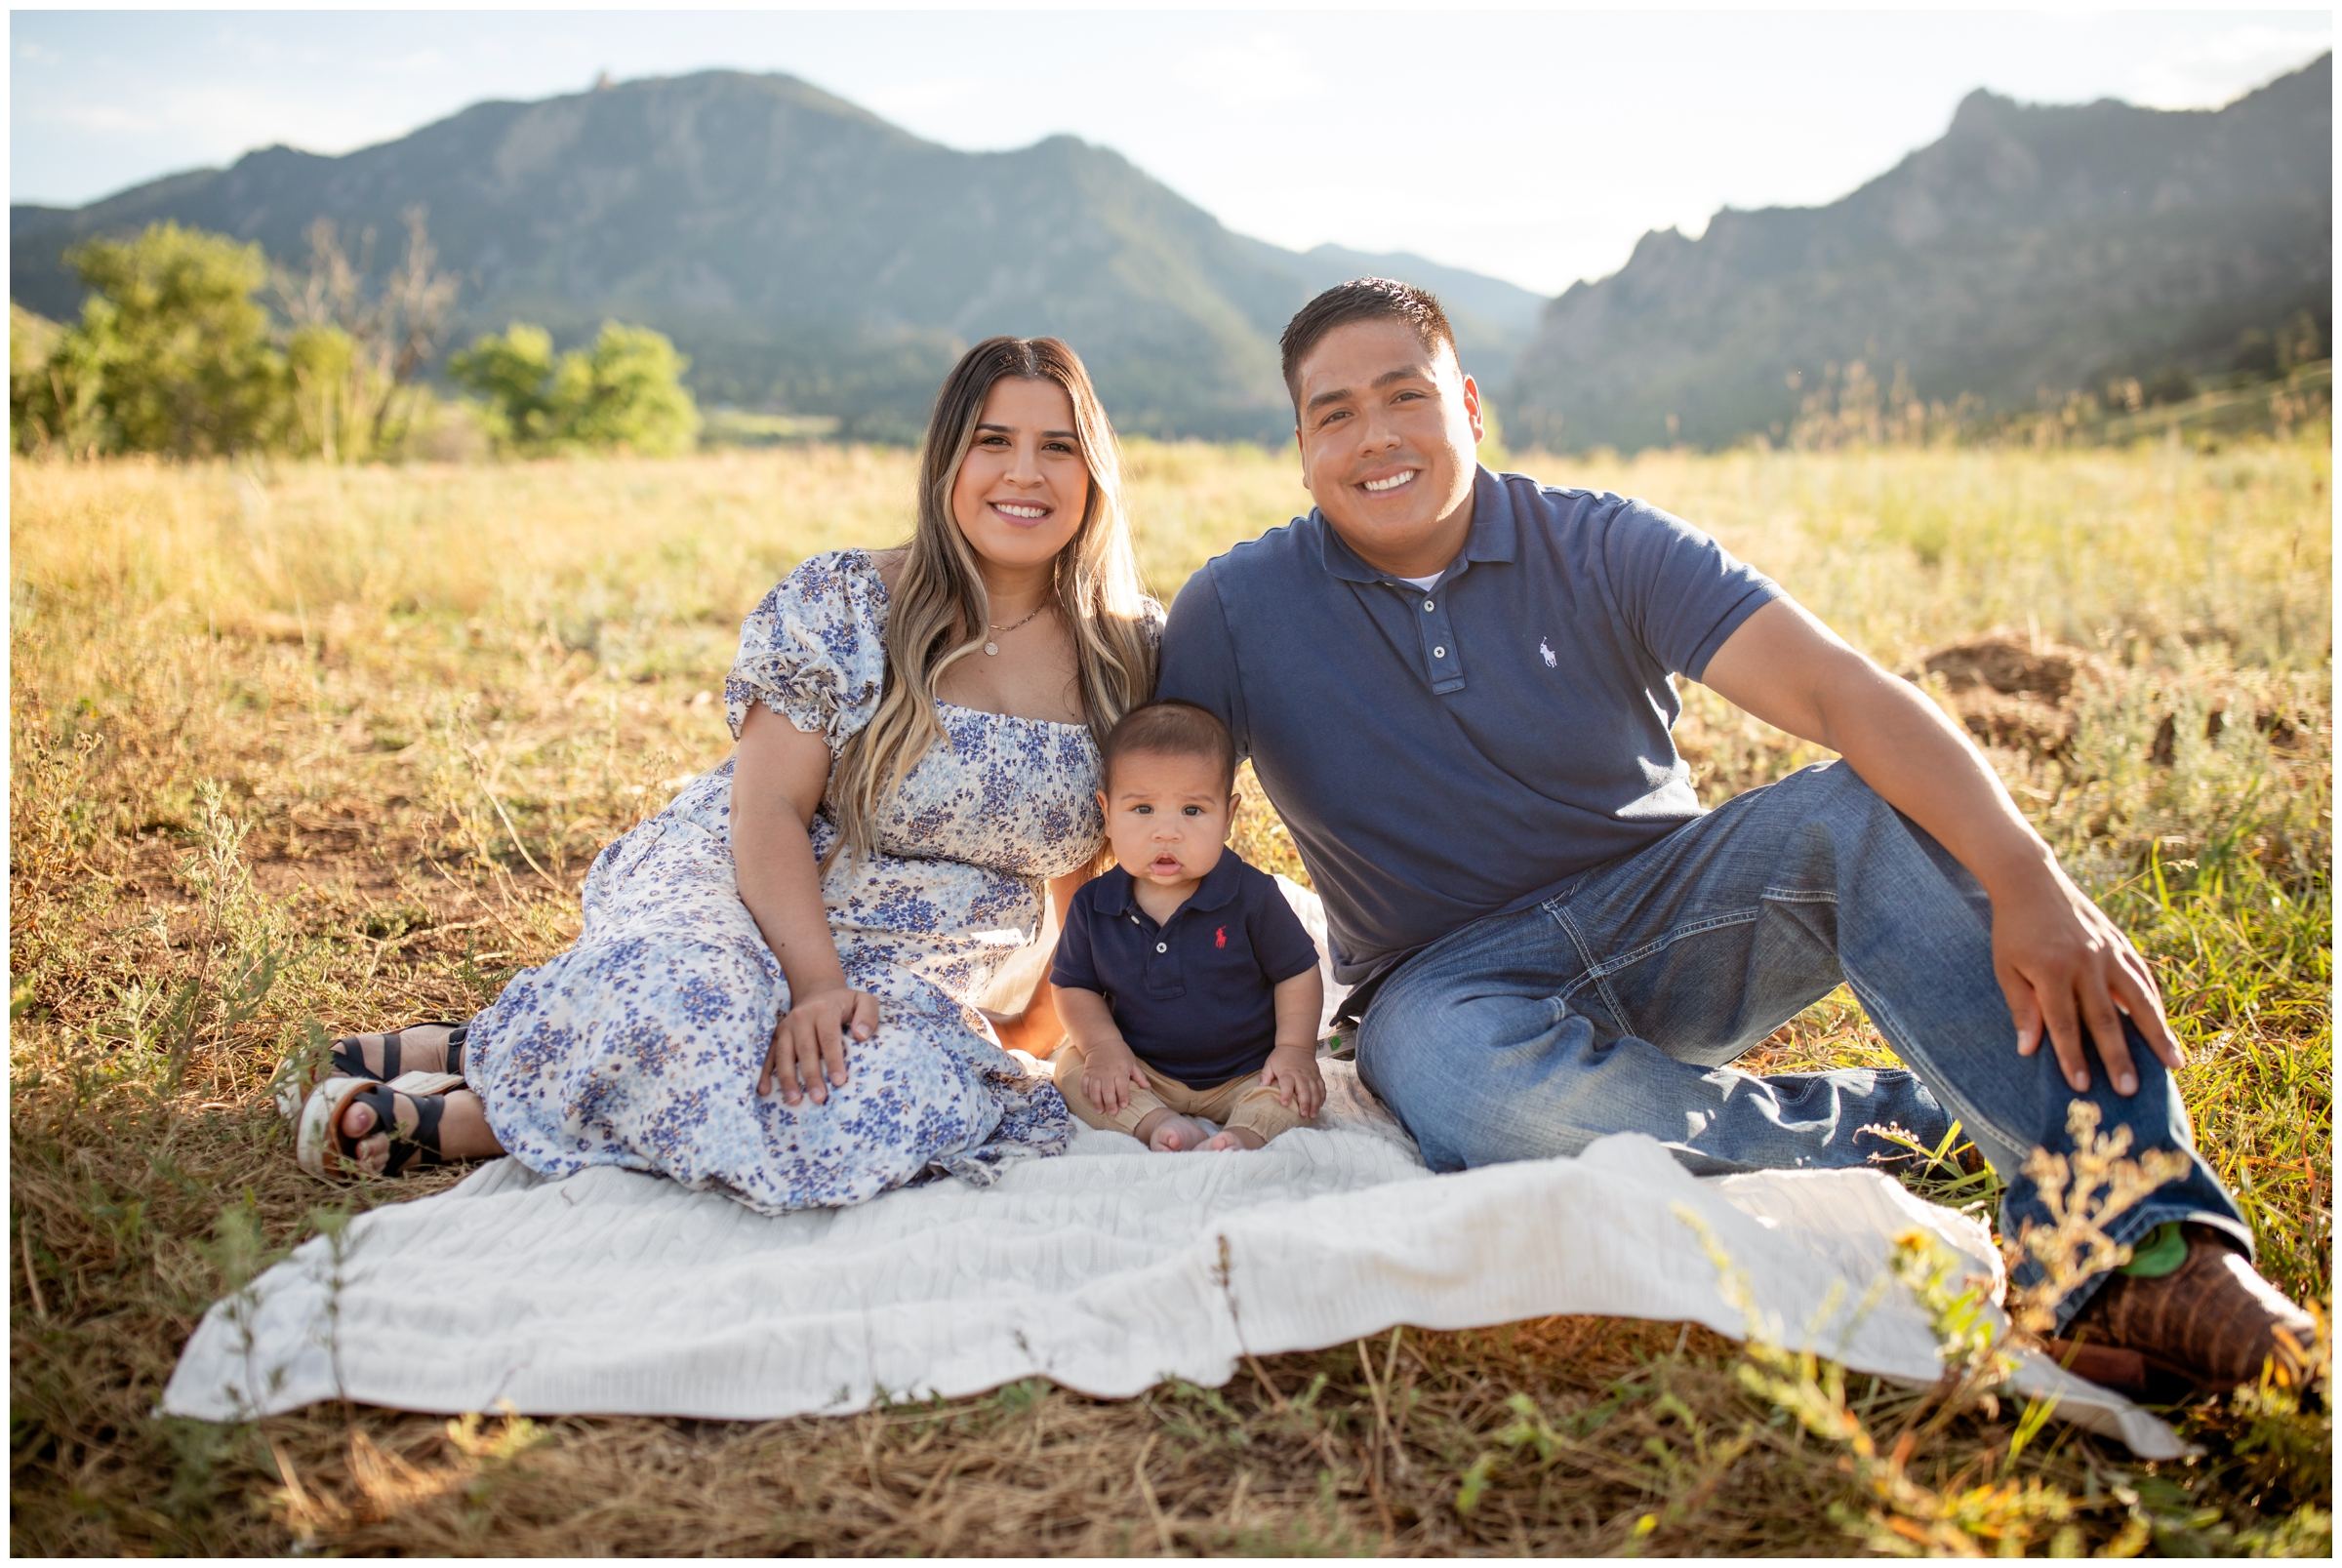 Boulder CO family portraits at South Mesa Trail by best Colorado family photographer Plum Pretty Photography 